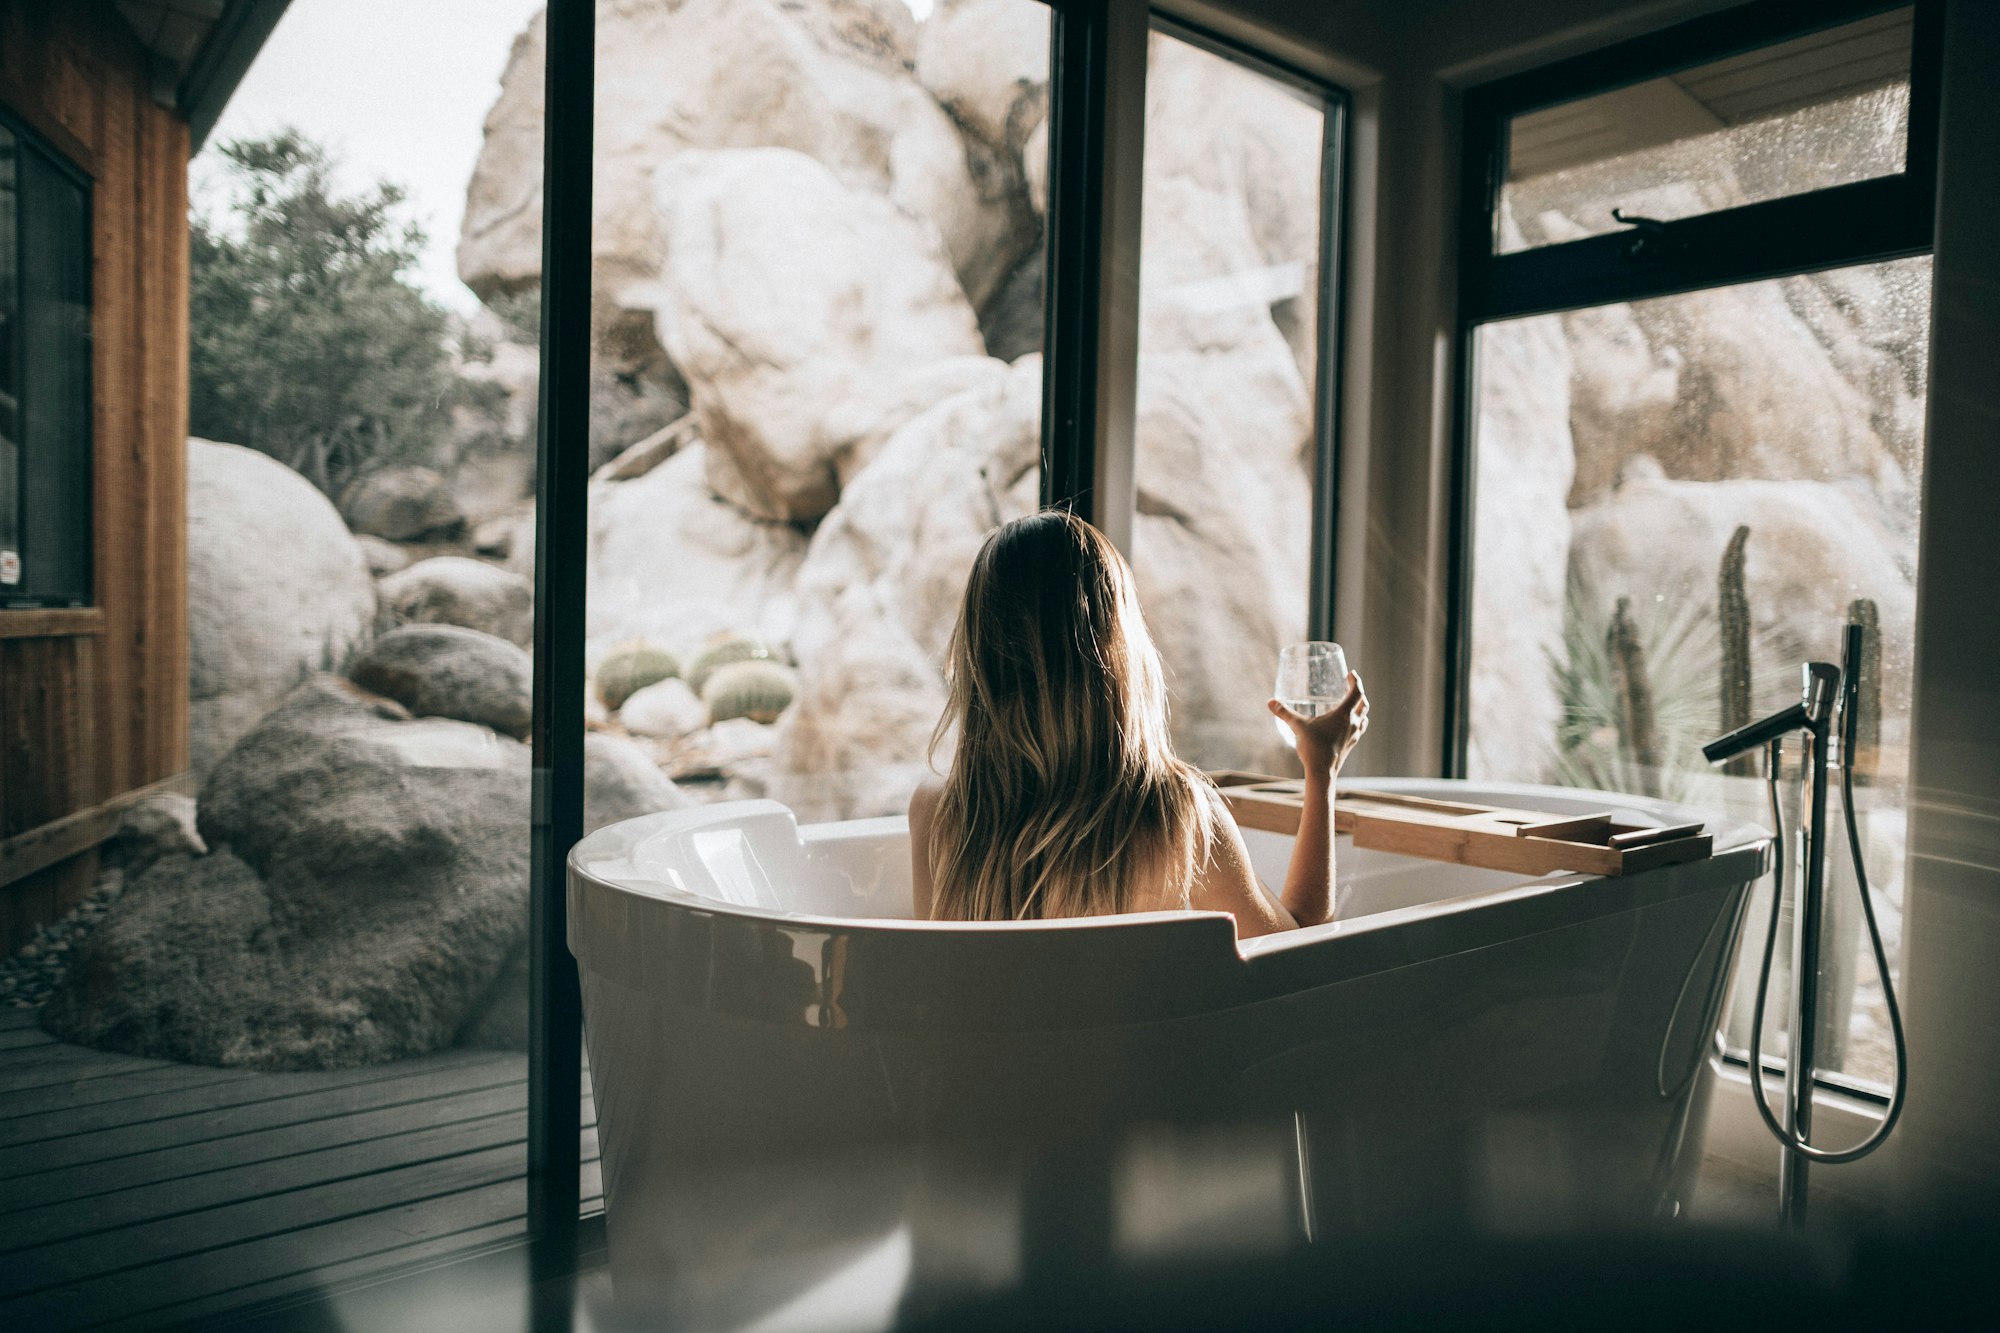 Things You Should Know Before Buying a Hot Tub